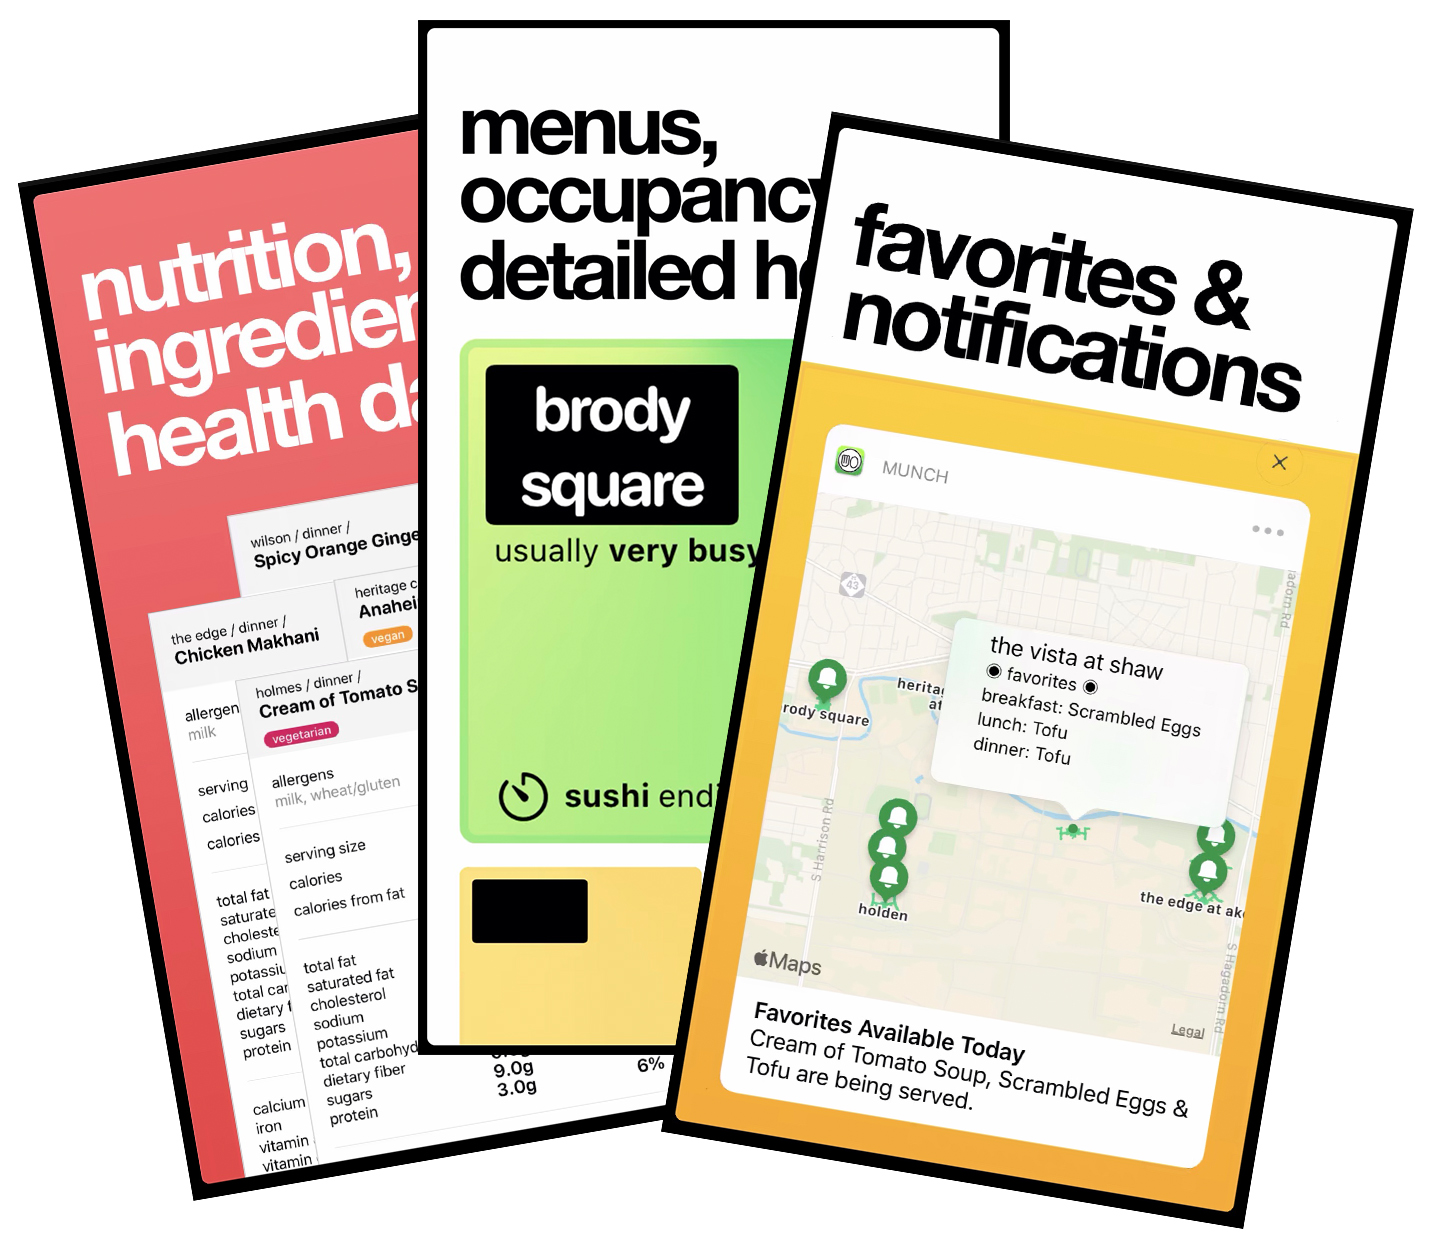 Screenshots from Munch App featuring nutritional content, menus, and notifications from the app